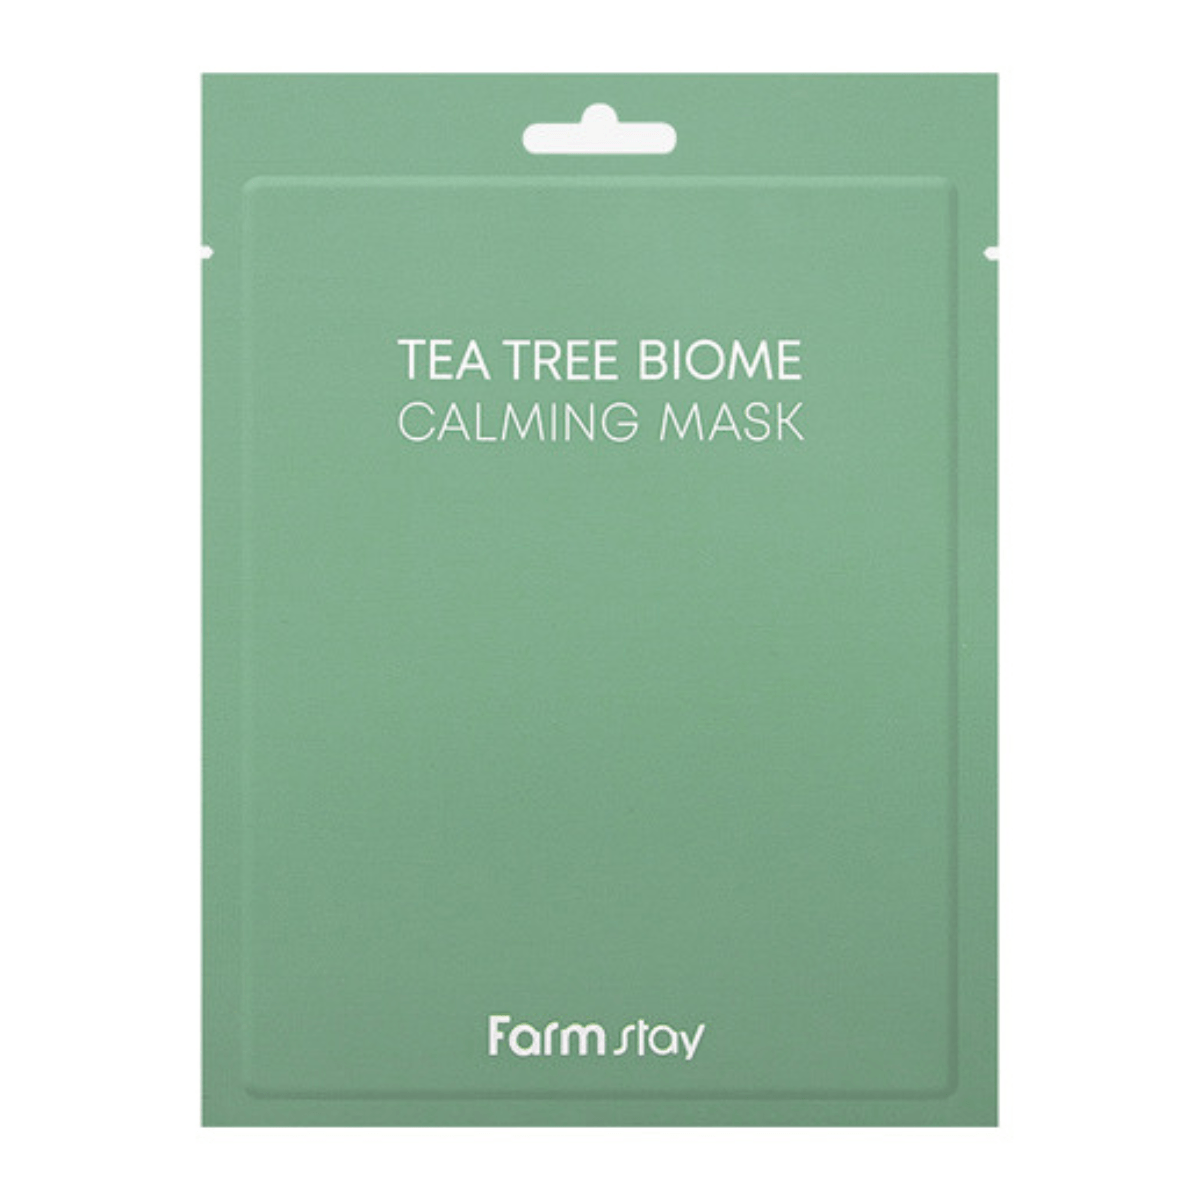 Farmstay Tea Tree Biome Calming Mask: Soothes and strengthens skin. Hydrates and nourishes. Reinforces damaged skin barrier.